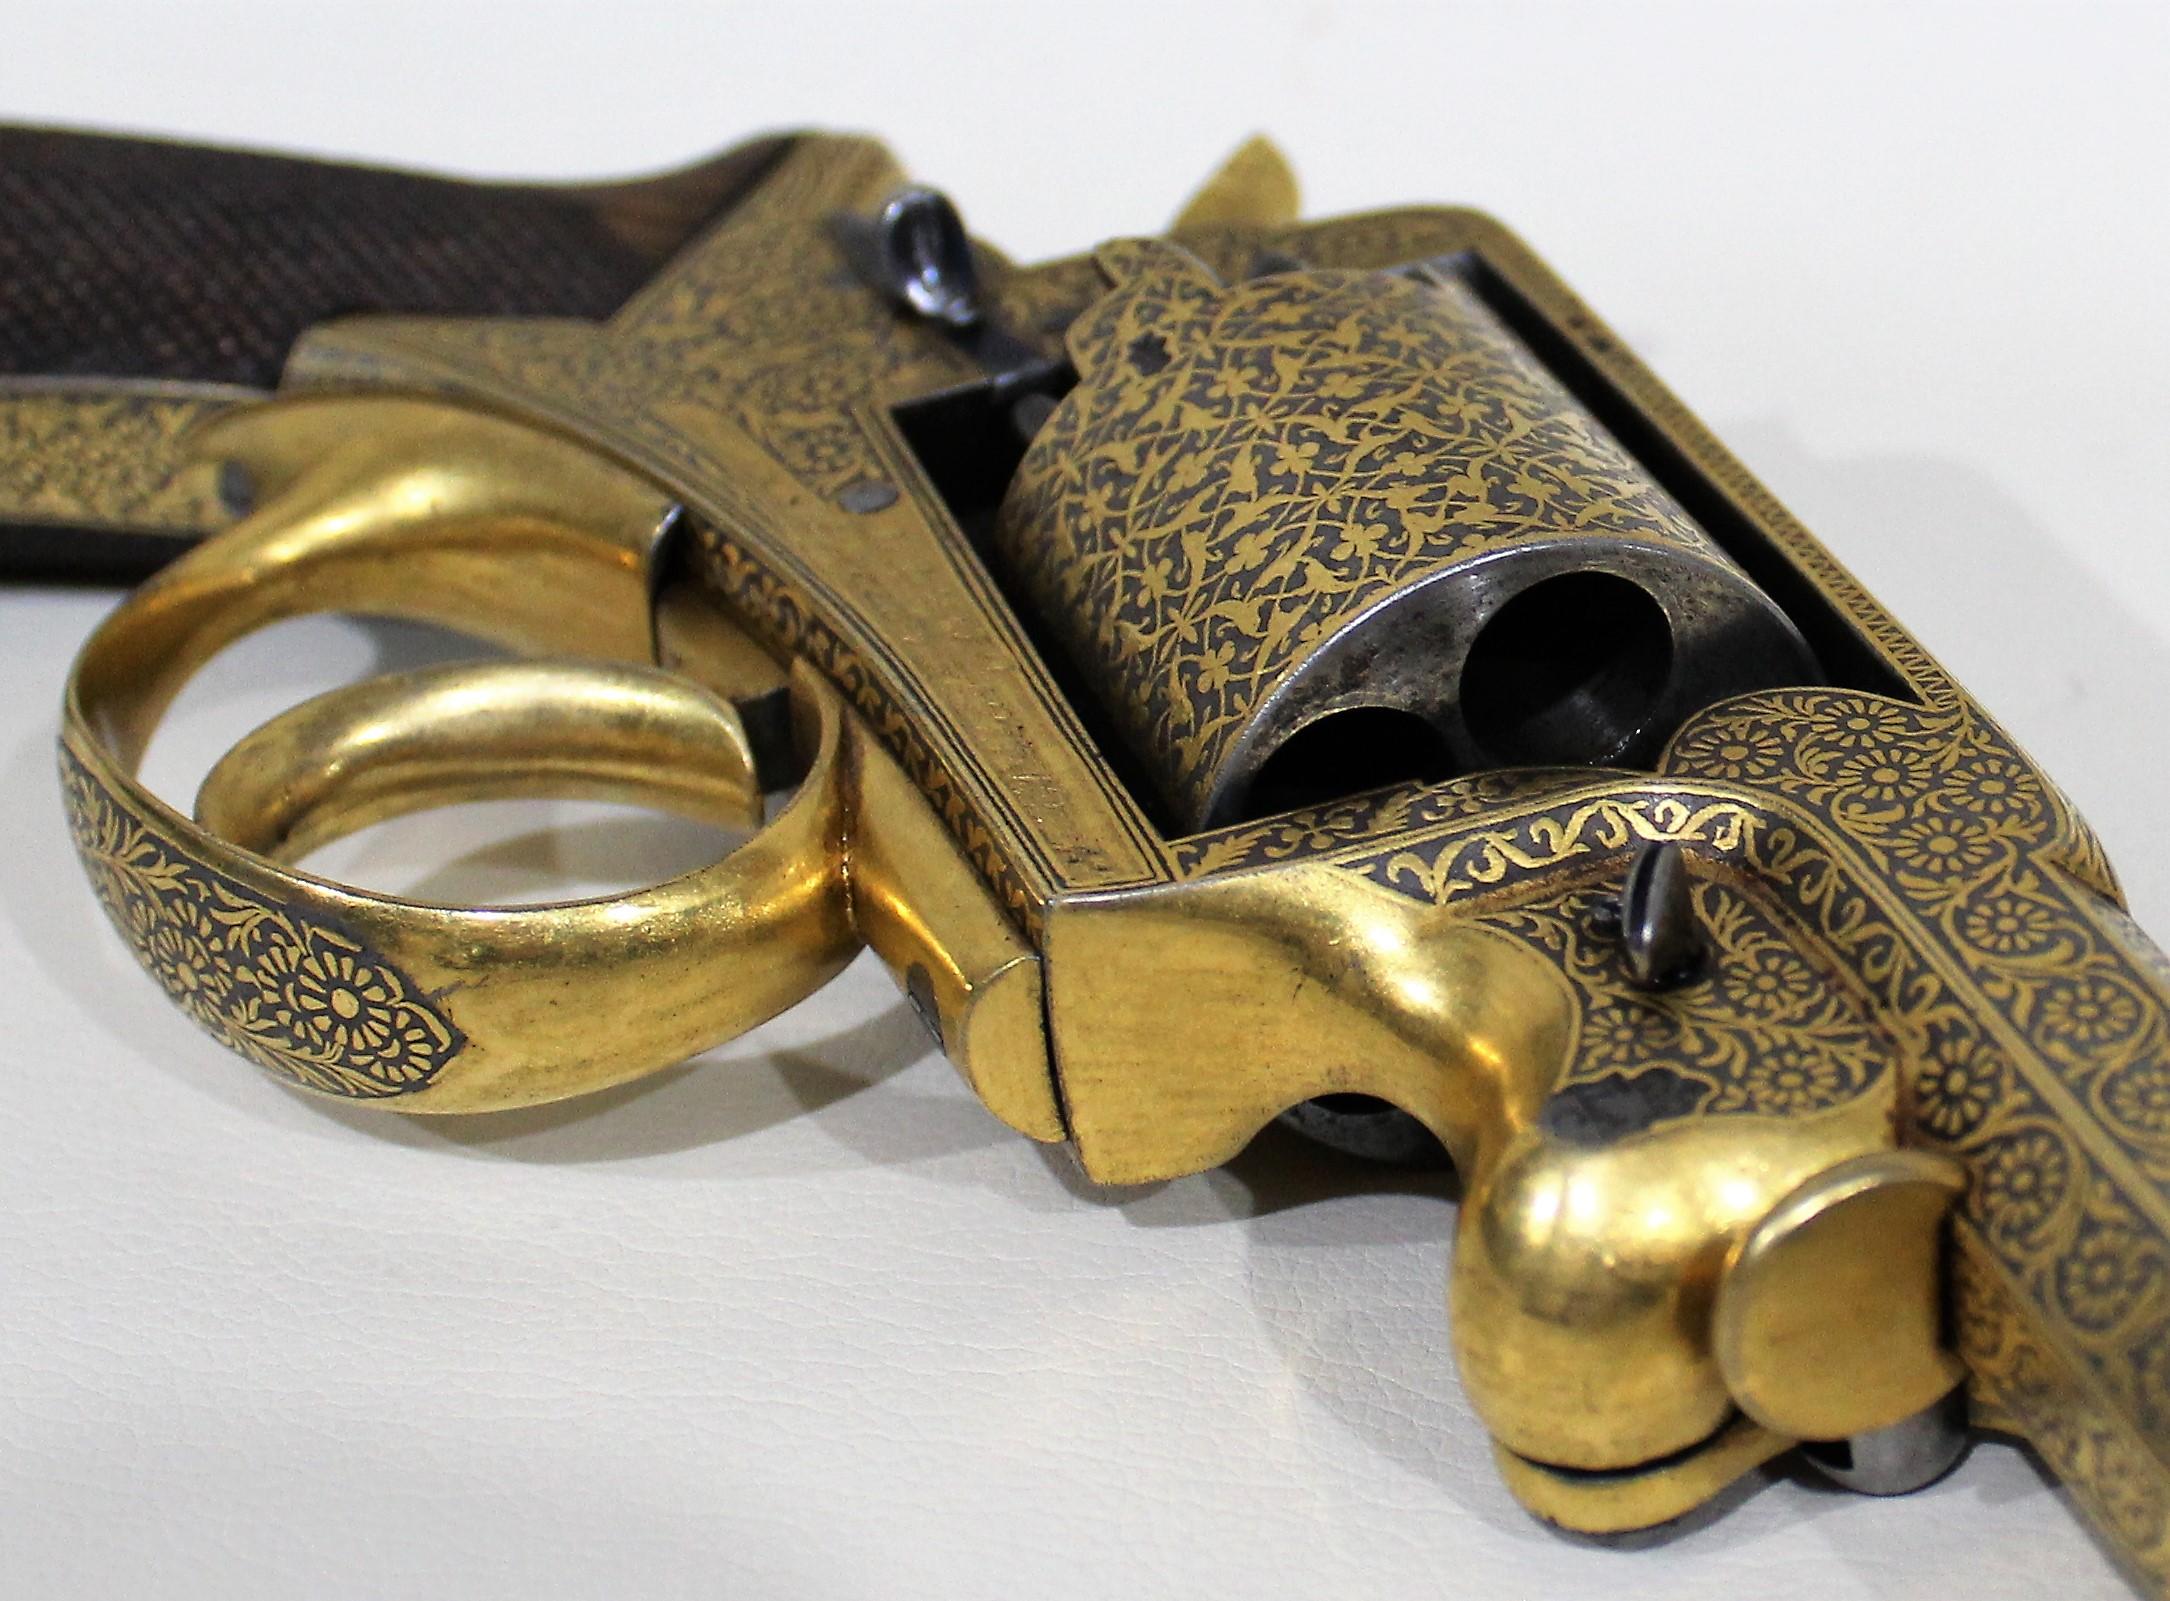 19th Century Beaumont-Adams Revolver with Gold Damascene Embellishment and Original Case